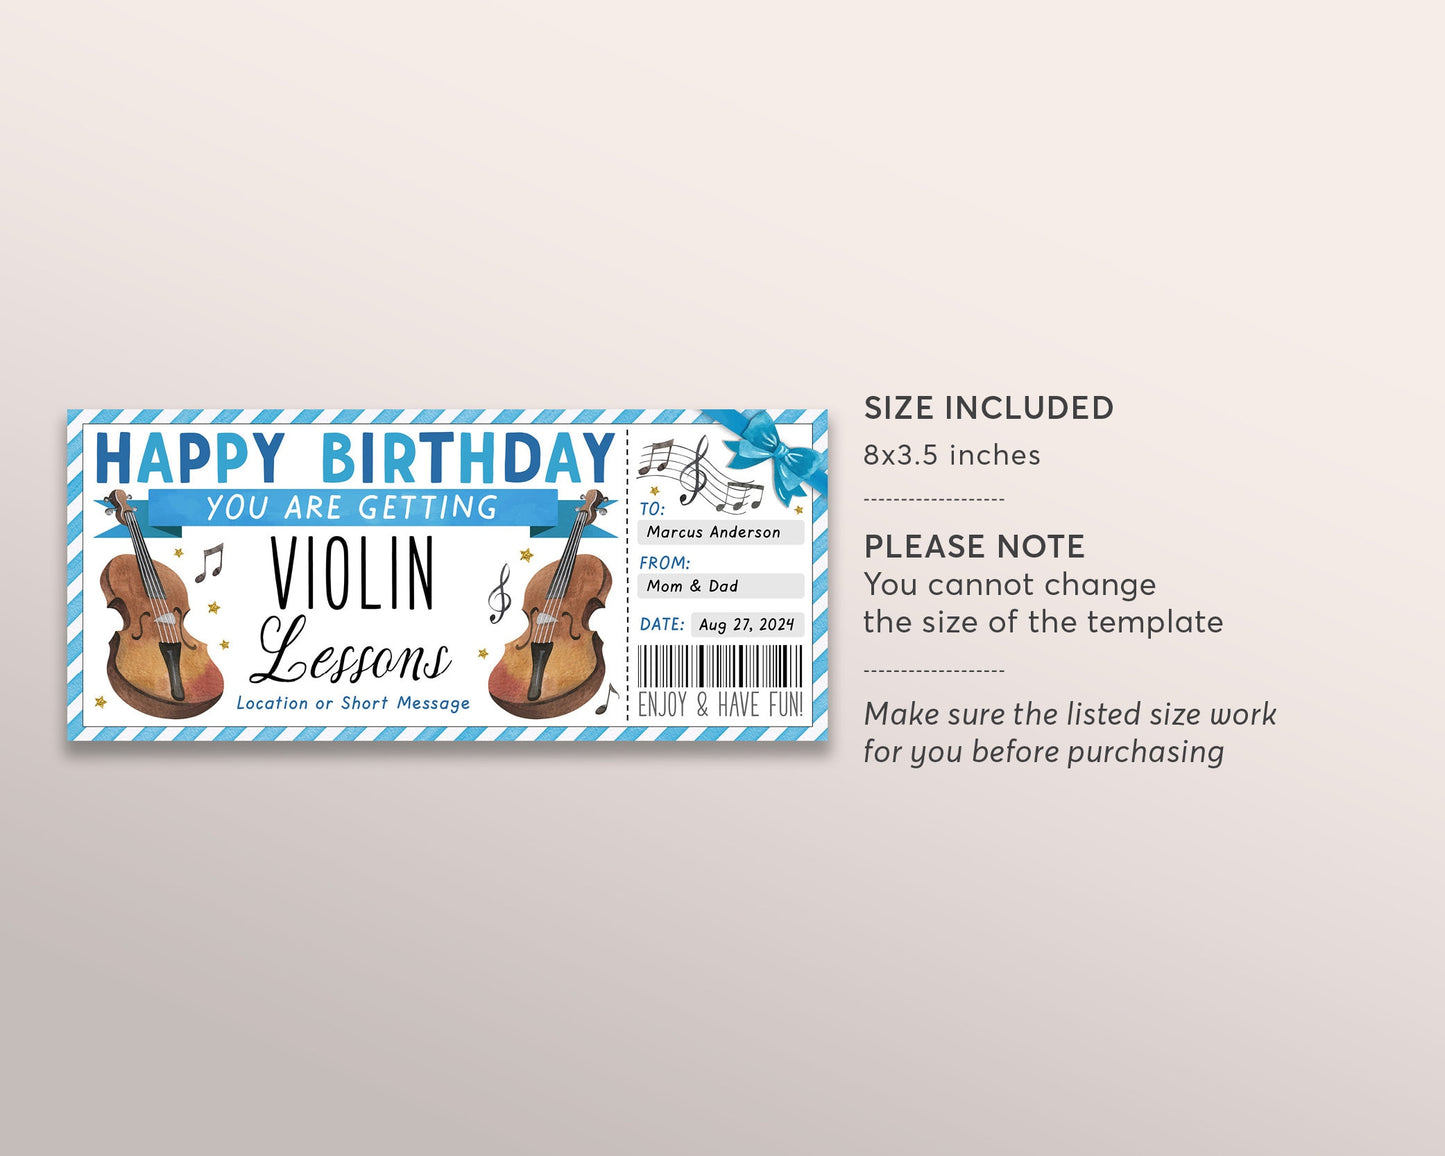 Violin Lessons Gift Certificate Editable Template, Birthday Surprise Music Violin Class Masterclass Gift Voucher Gift Reveal Coupon For Him